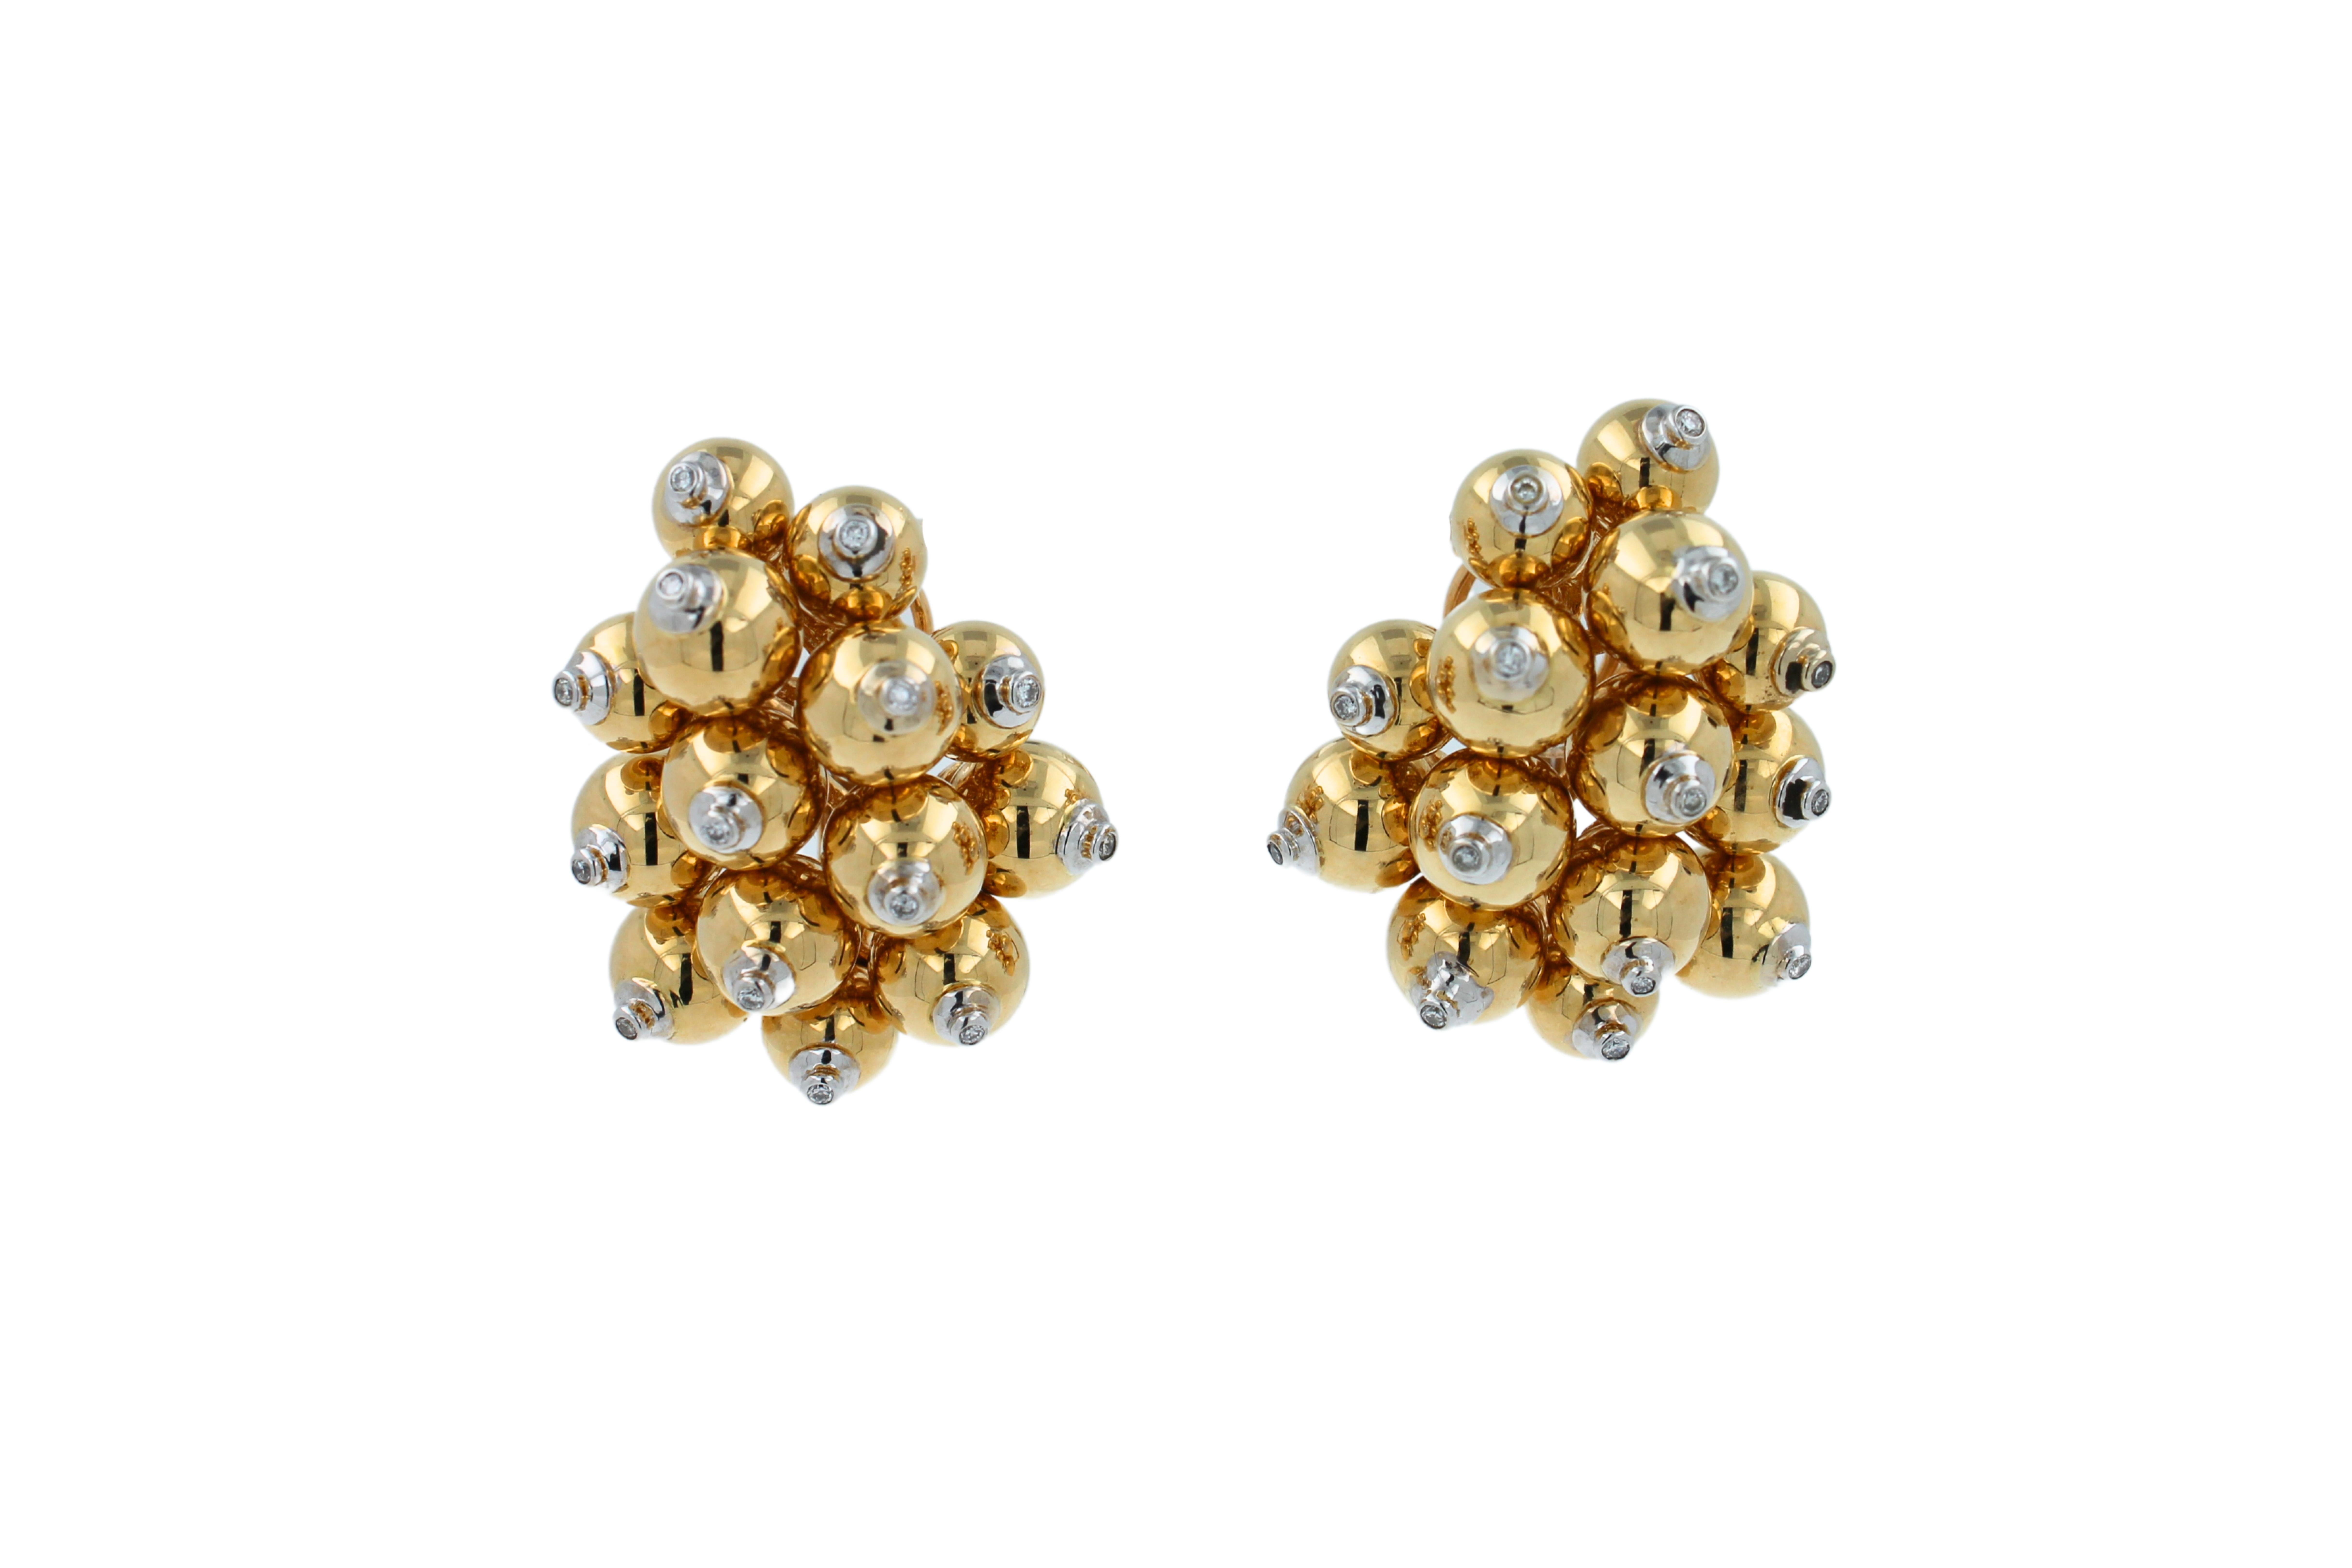 Very Beautiful, Unique, High-End Craftmanship with a polished finish. A versatile high-luxury fine earrings that can be worn with any outfit.
32.88 grams
18K Yellow Gold & 18K White Gold Details 
0.15 cts Diamonds F/VS
3.5 front length of earrings
